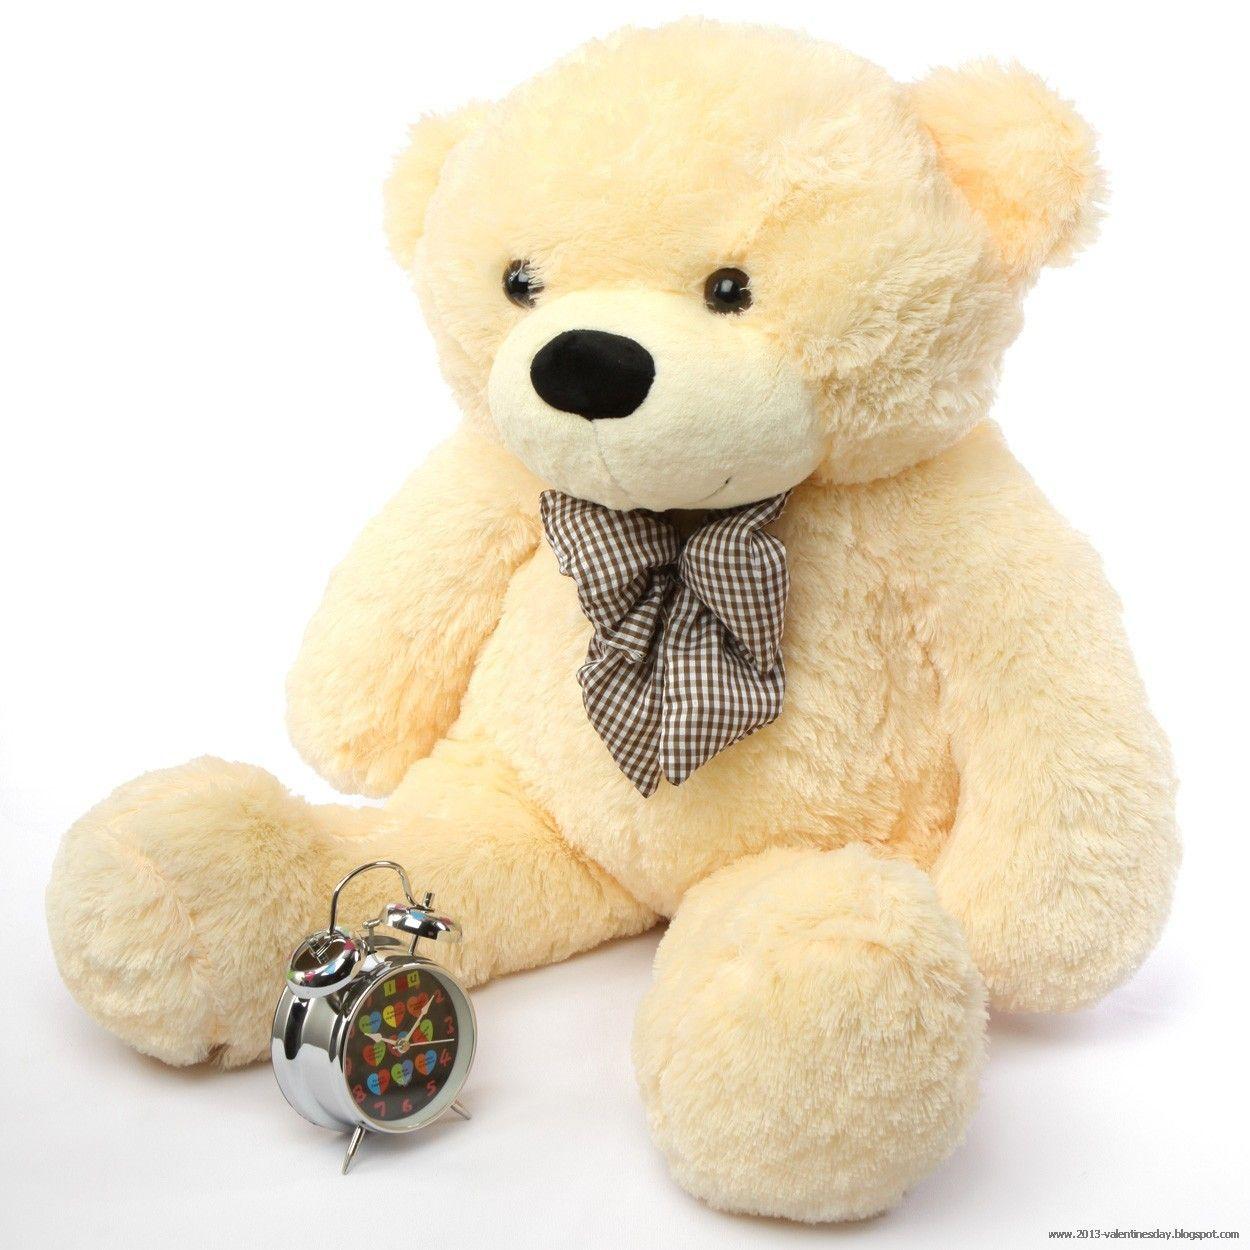 Wallpaper For > Wallpaper Of Cute Teddy Bear With Flowers